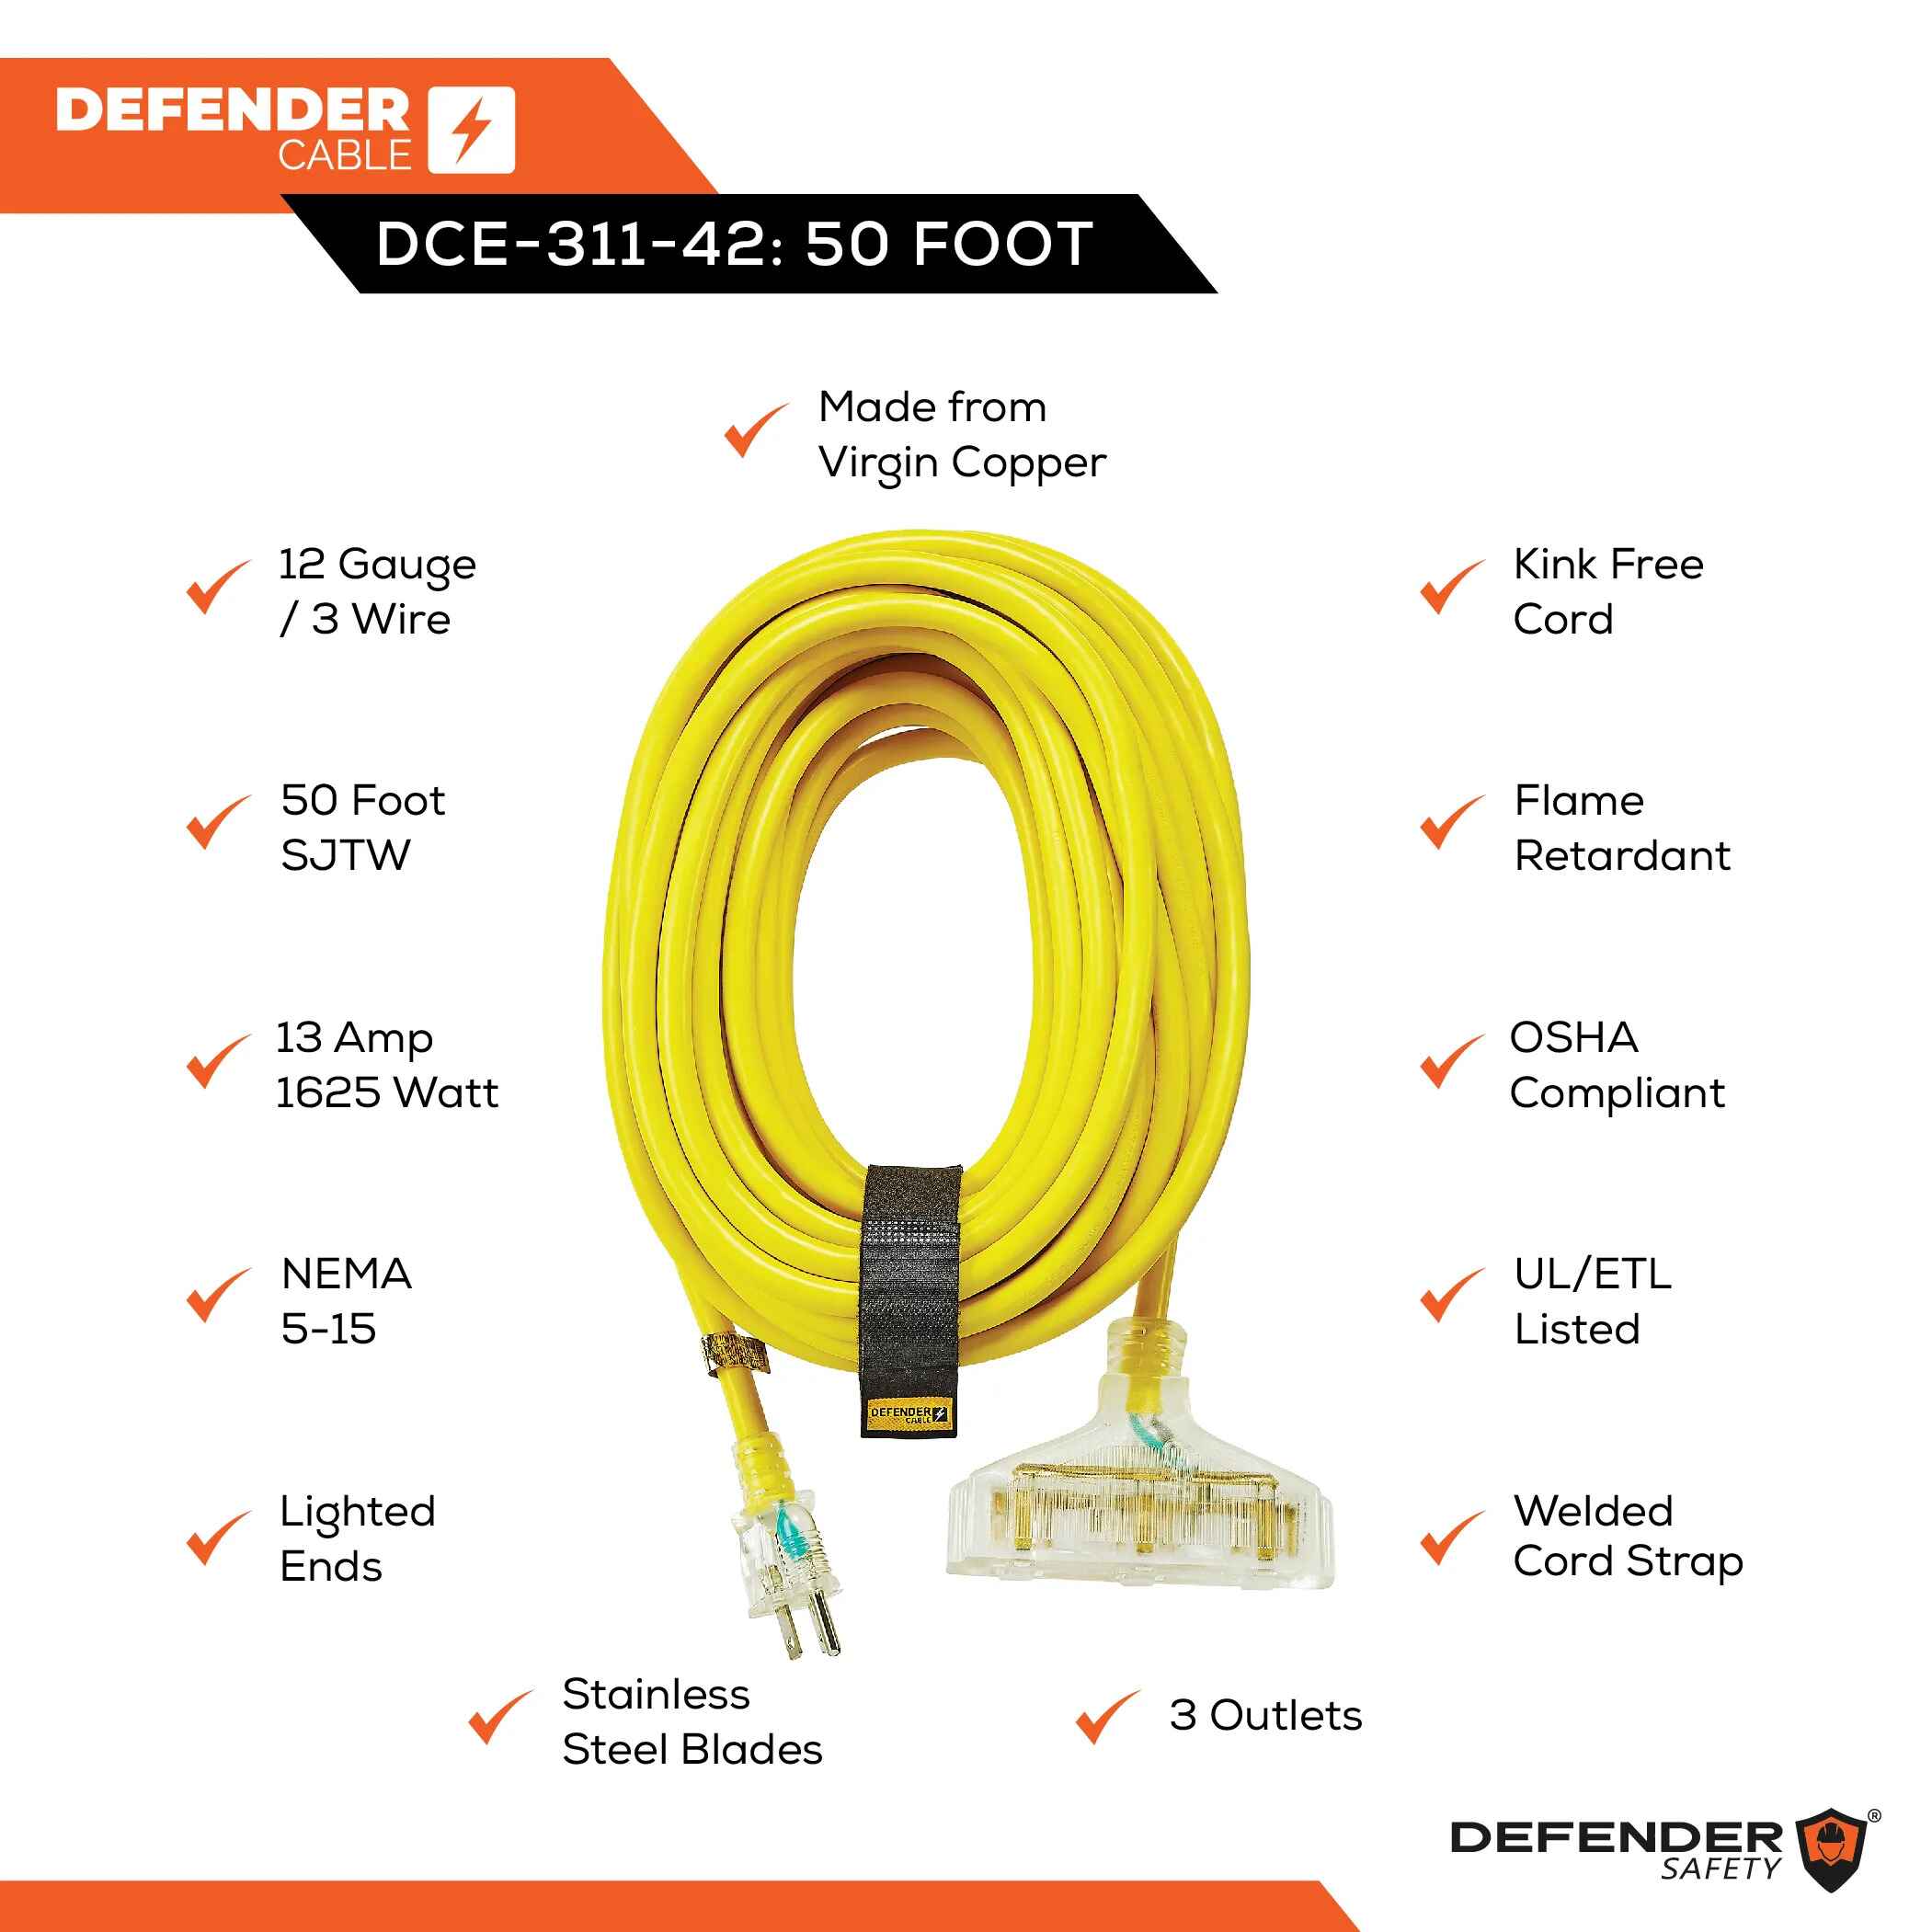 12/3 Gauge, 50 ft SJTW POWERBLOCK w/Lighted End Extension Cord. Contractor Grade, UL/ETL Listed - Defender Safety